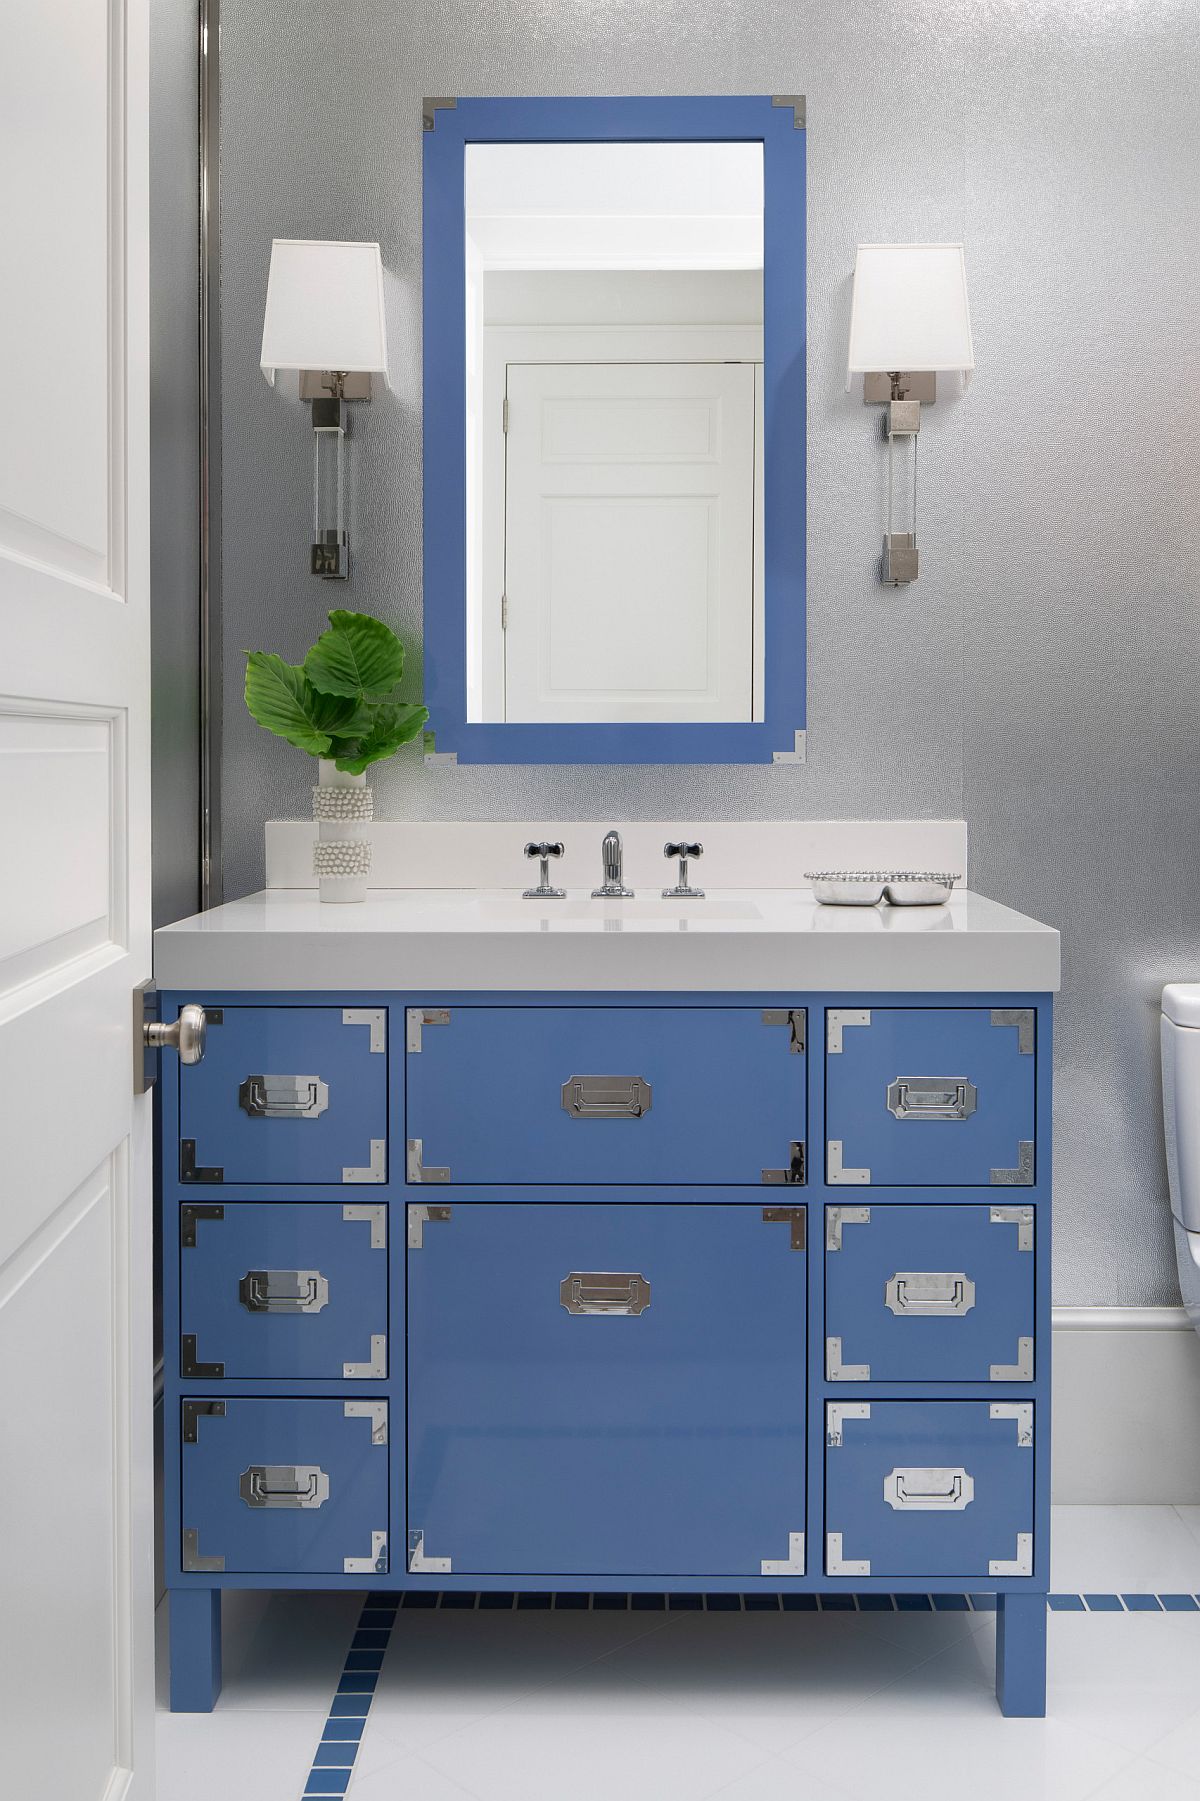 Chic-powder-room-in-gray-with-exquisite-vanity-in-blue-and-a-mirror-that-has-a-frame-in-matching-shade-29652